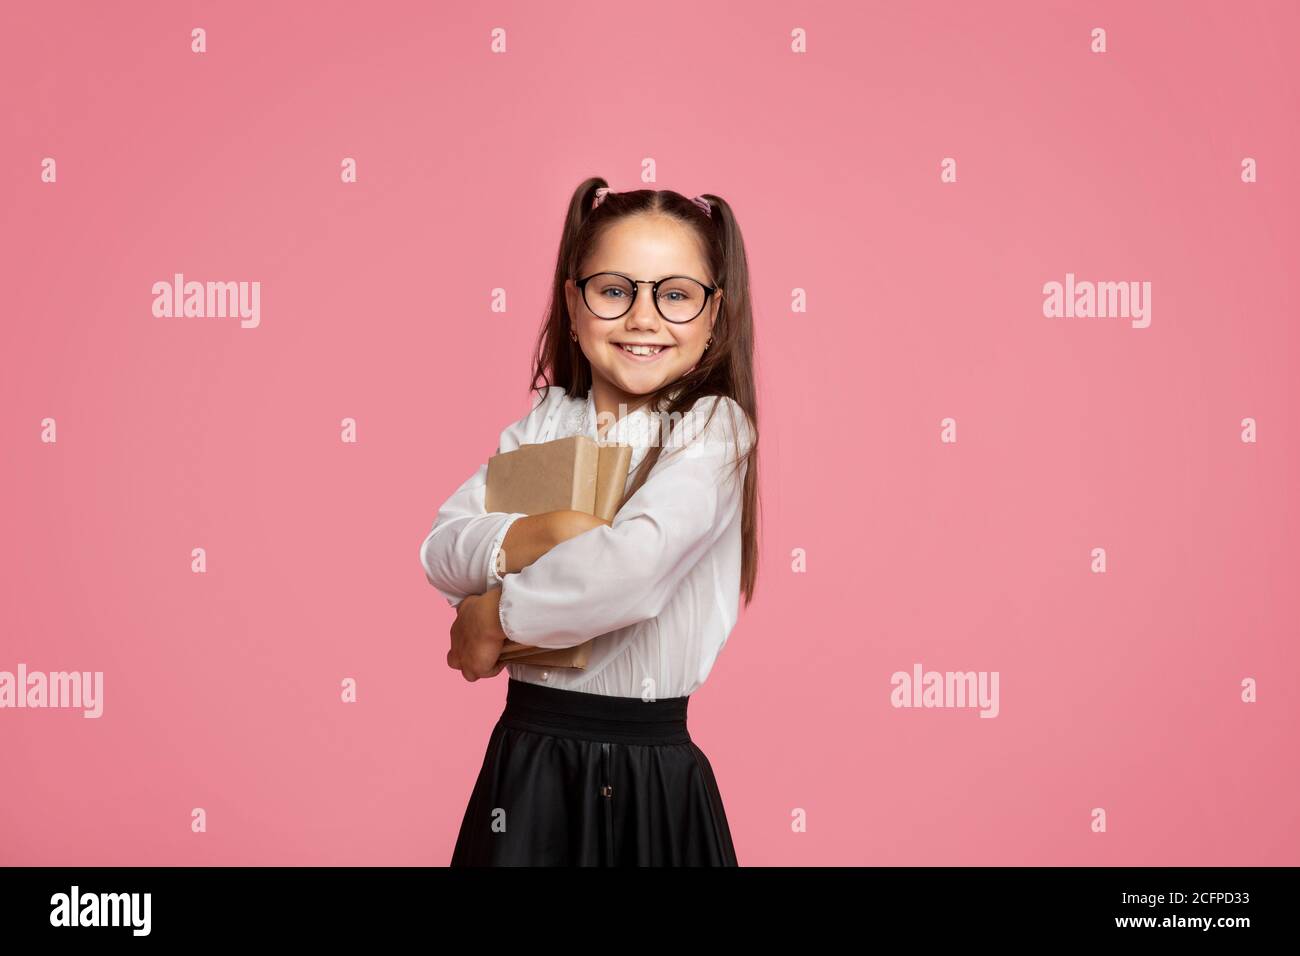 I love school. Smiling girl with in glasses hugs books and looks at camera Stock Photo